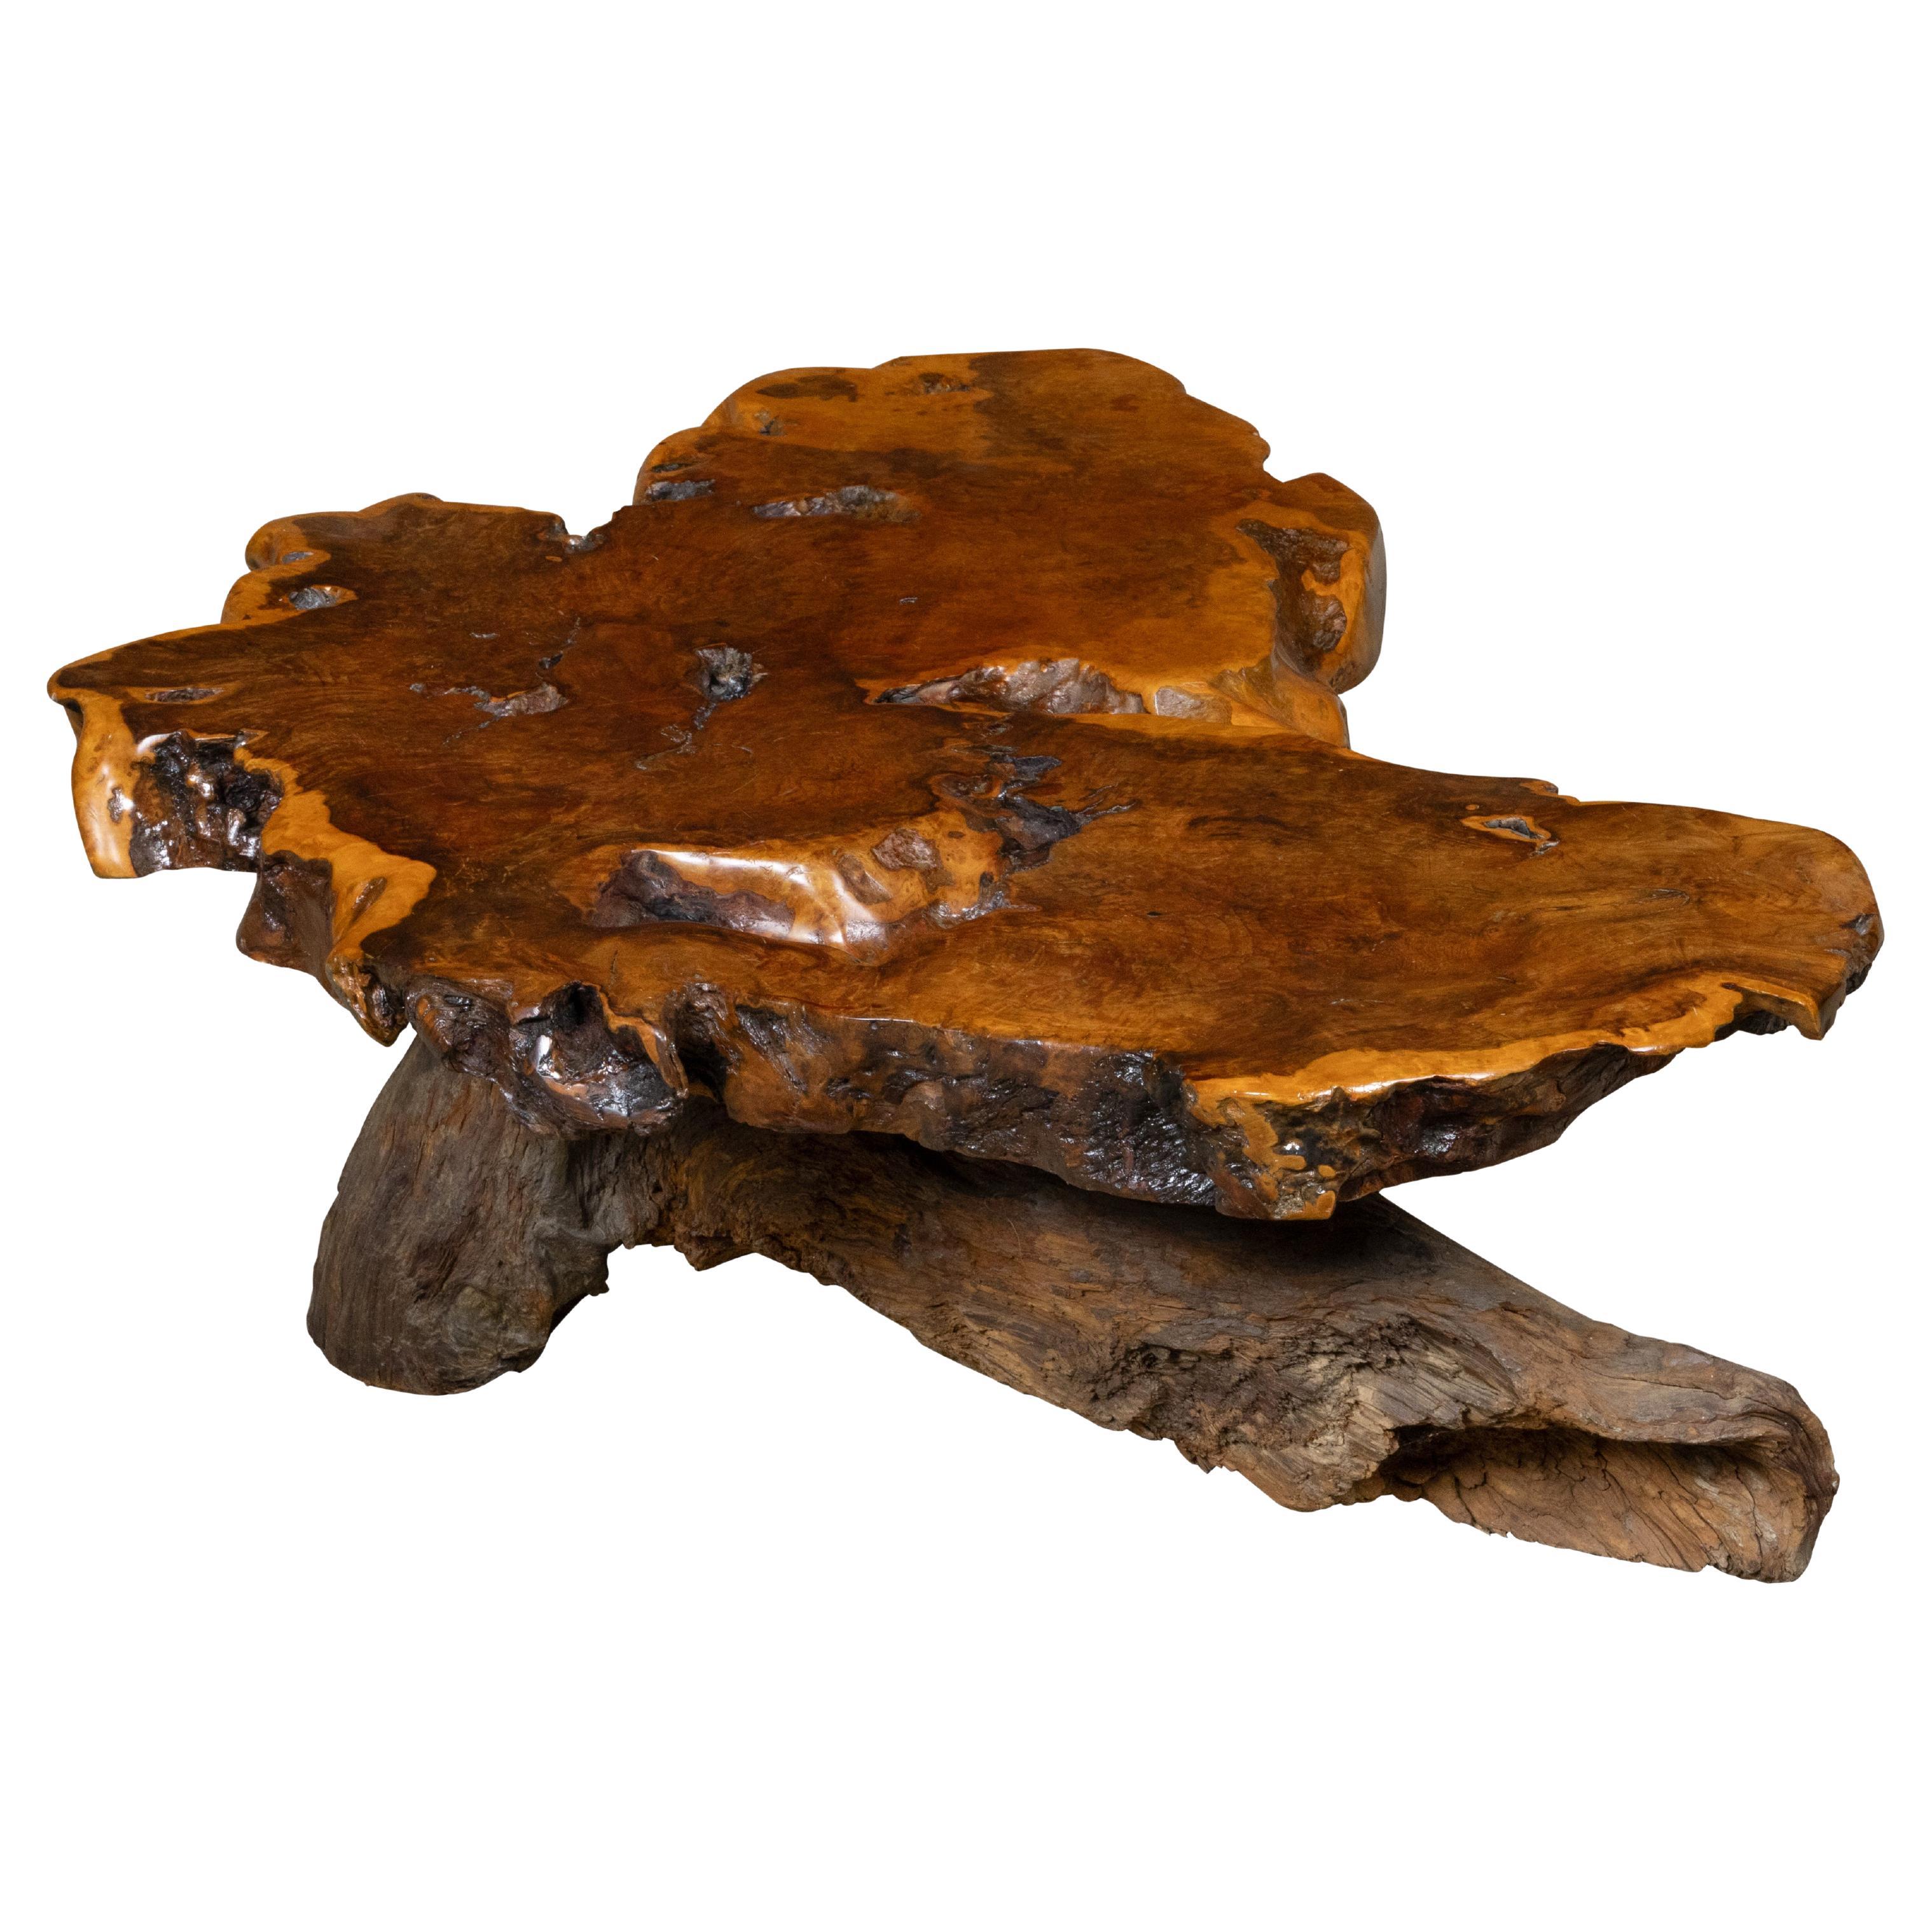 Live Edge Redwood America  Coffee Table with Rustic Character, Vintage